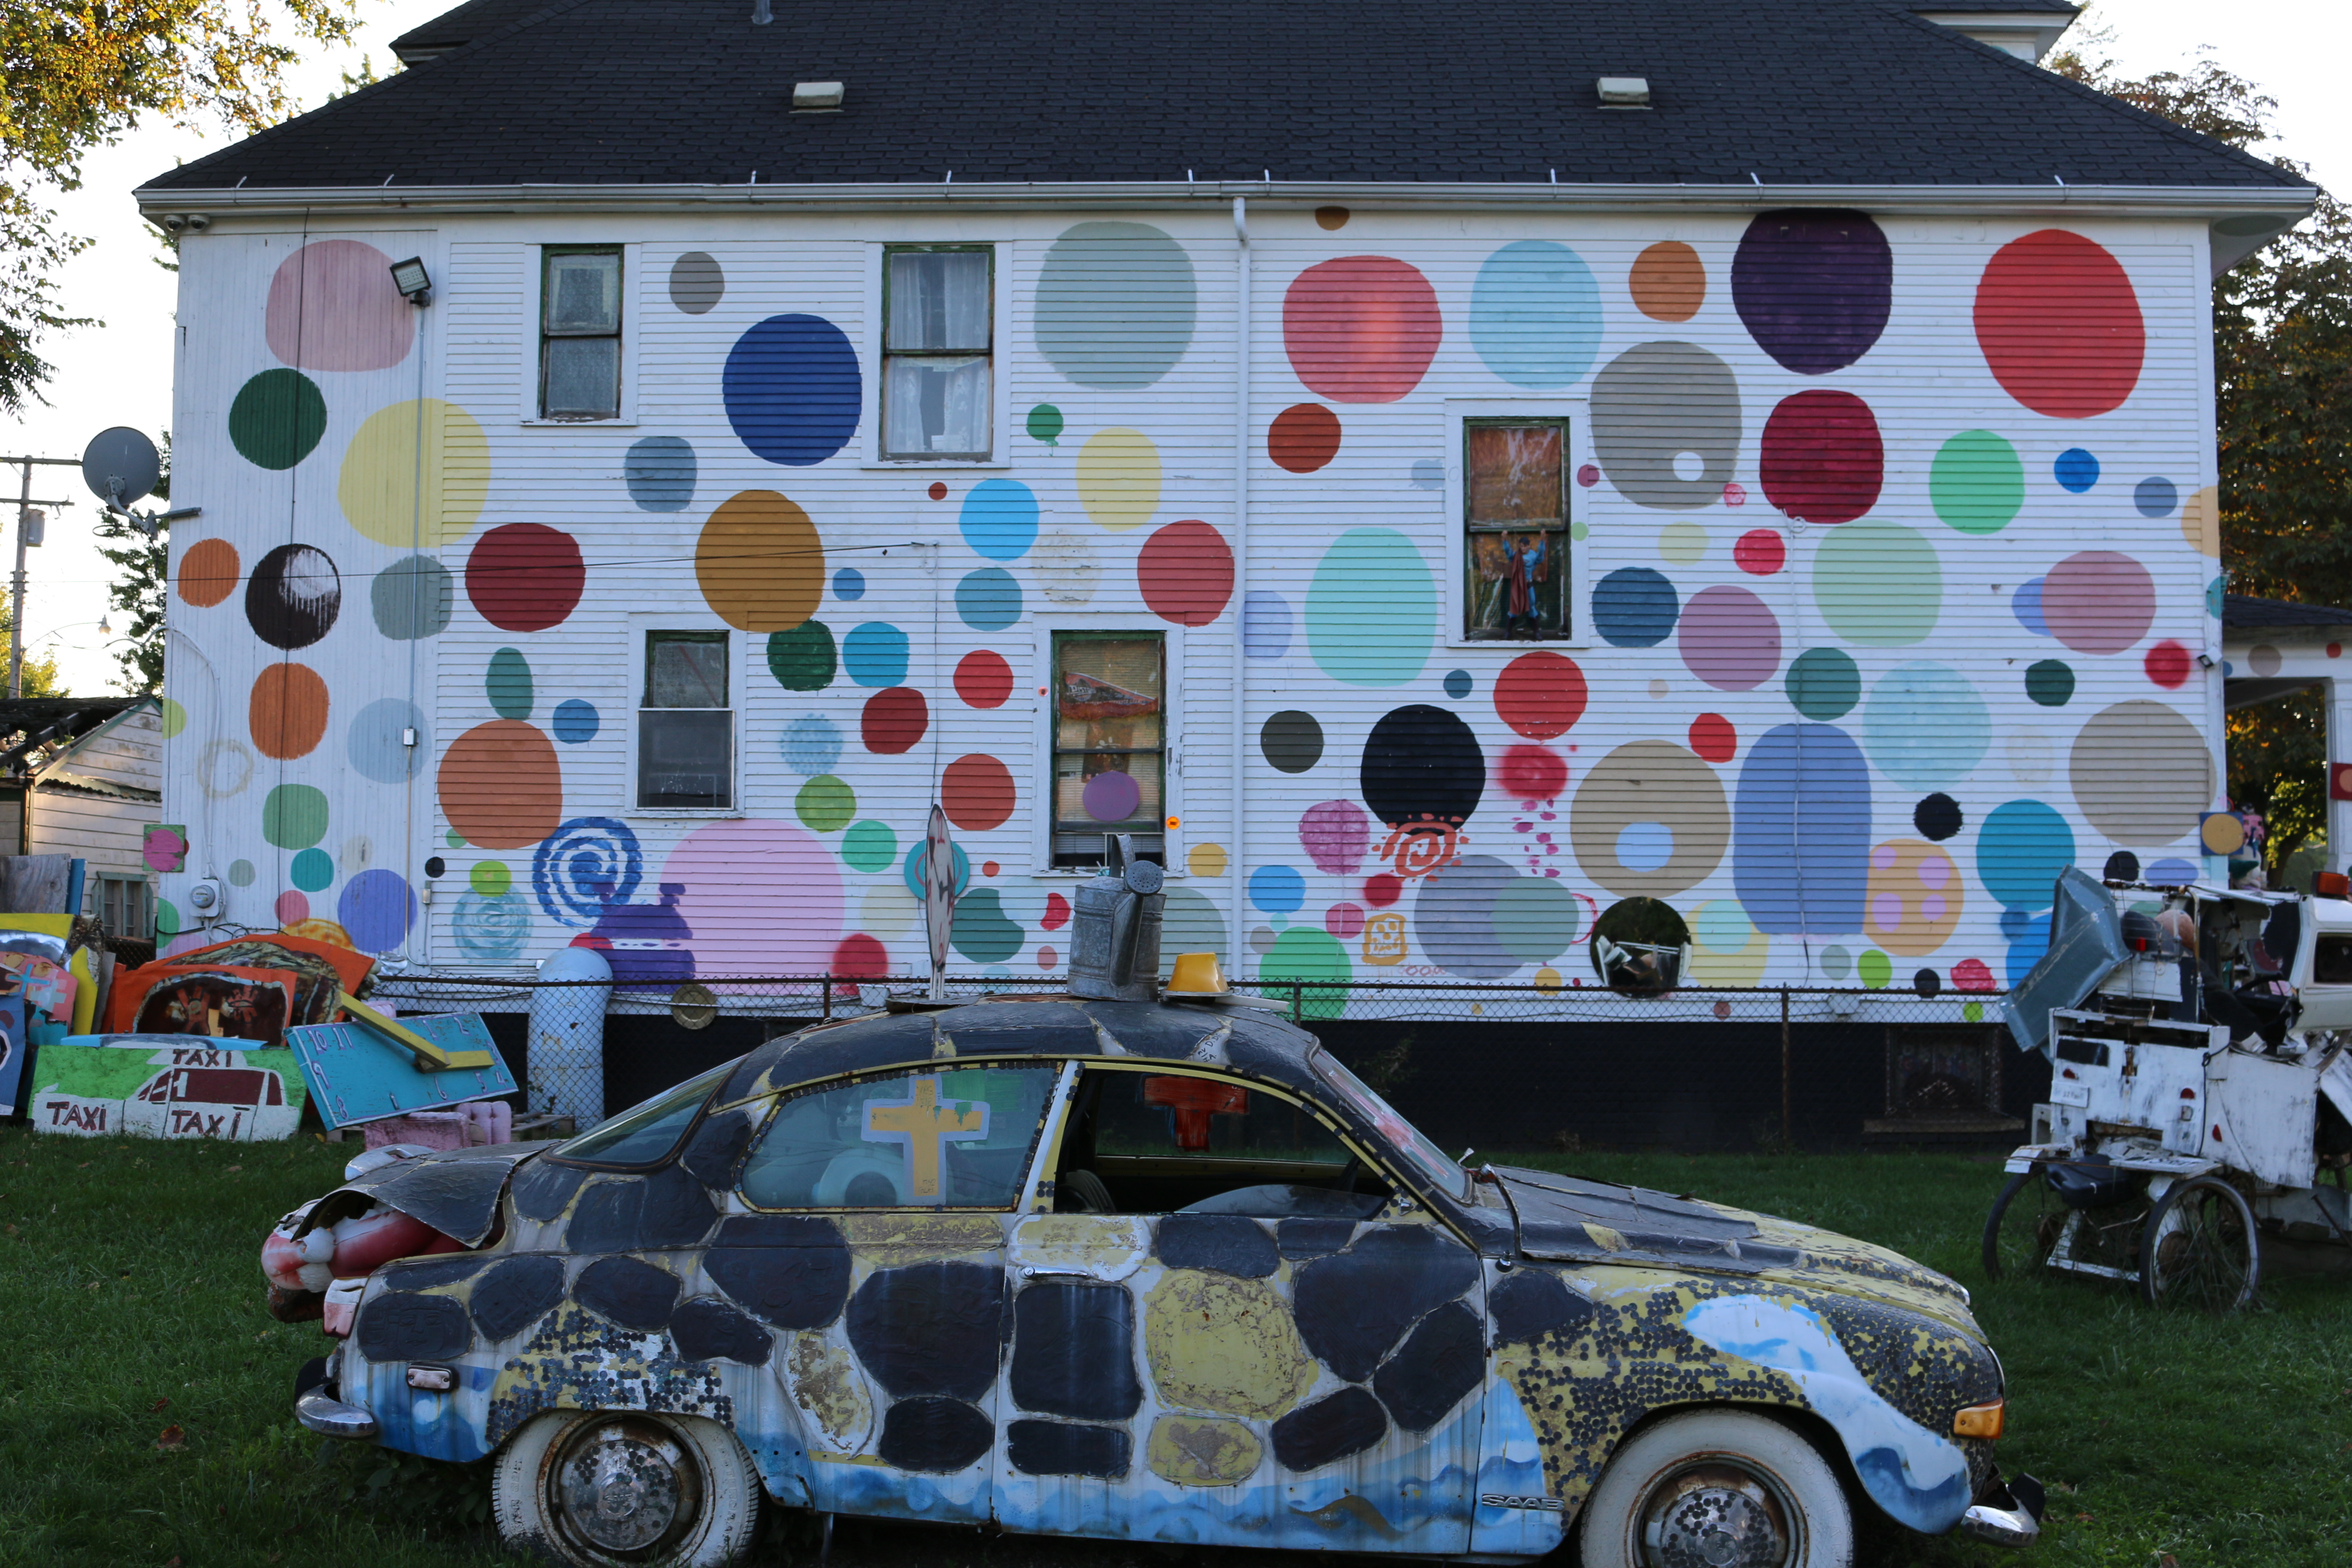 Dotty Wotty house with multi-colored polka dots on white painted exterior.